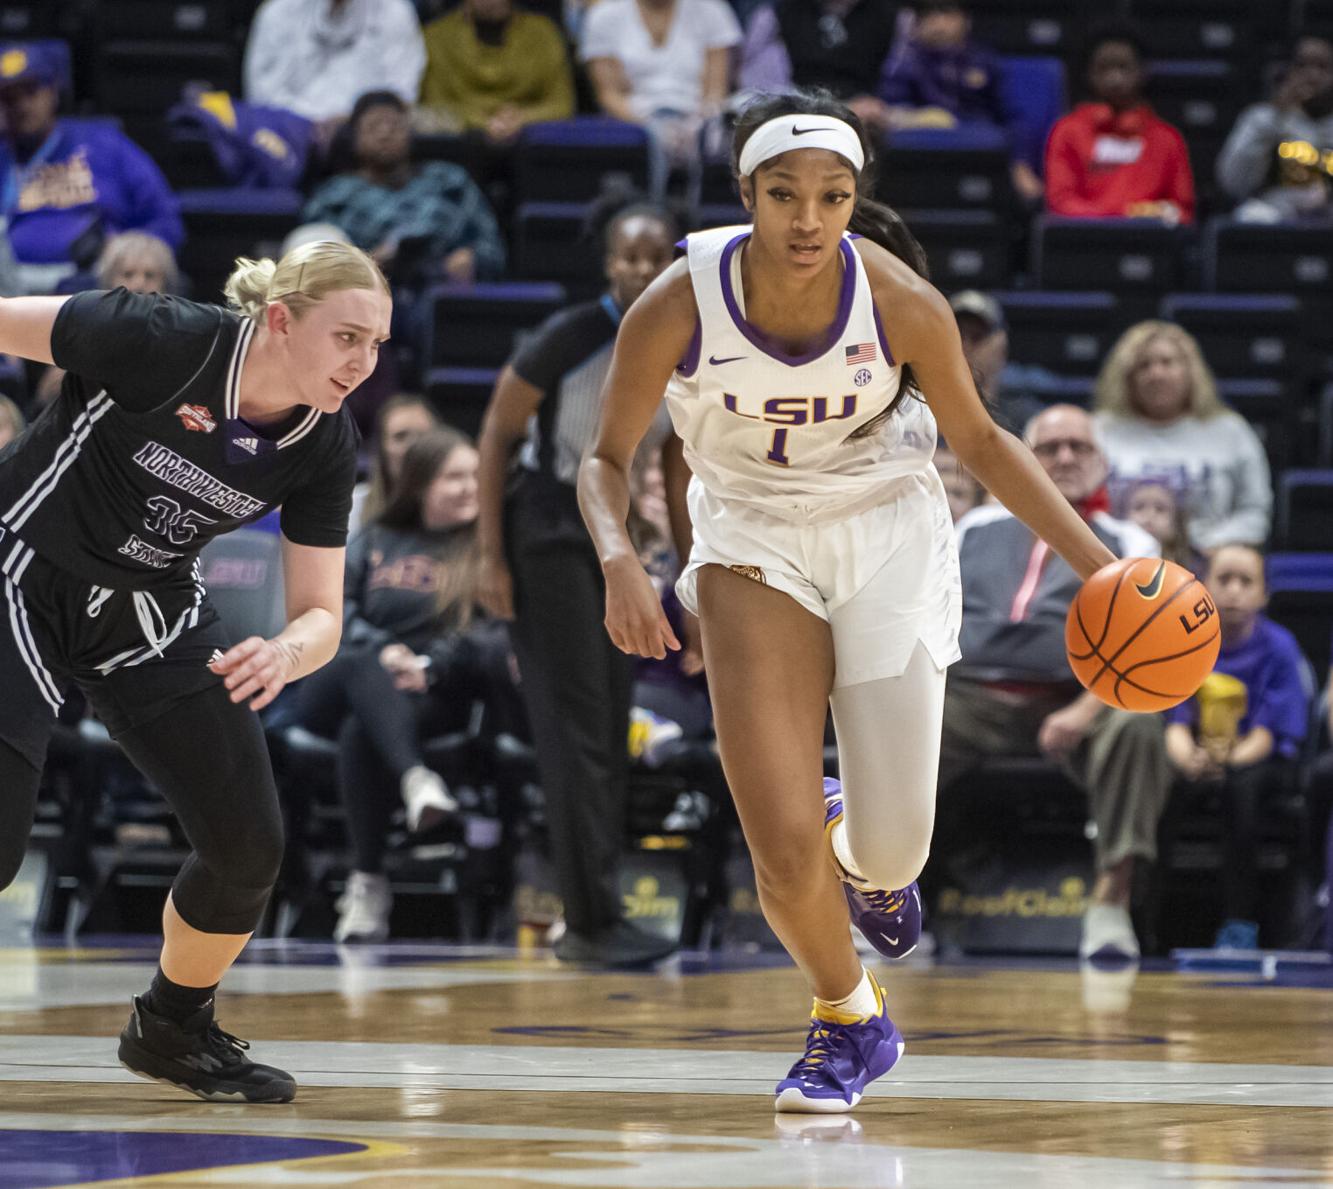 LSU women's basketball team's chance to win national title getting